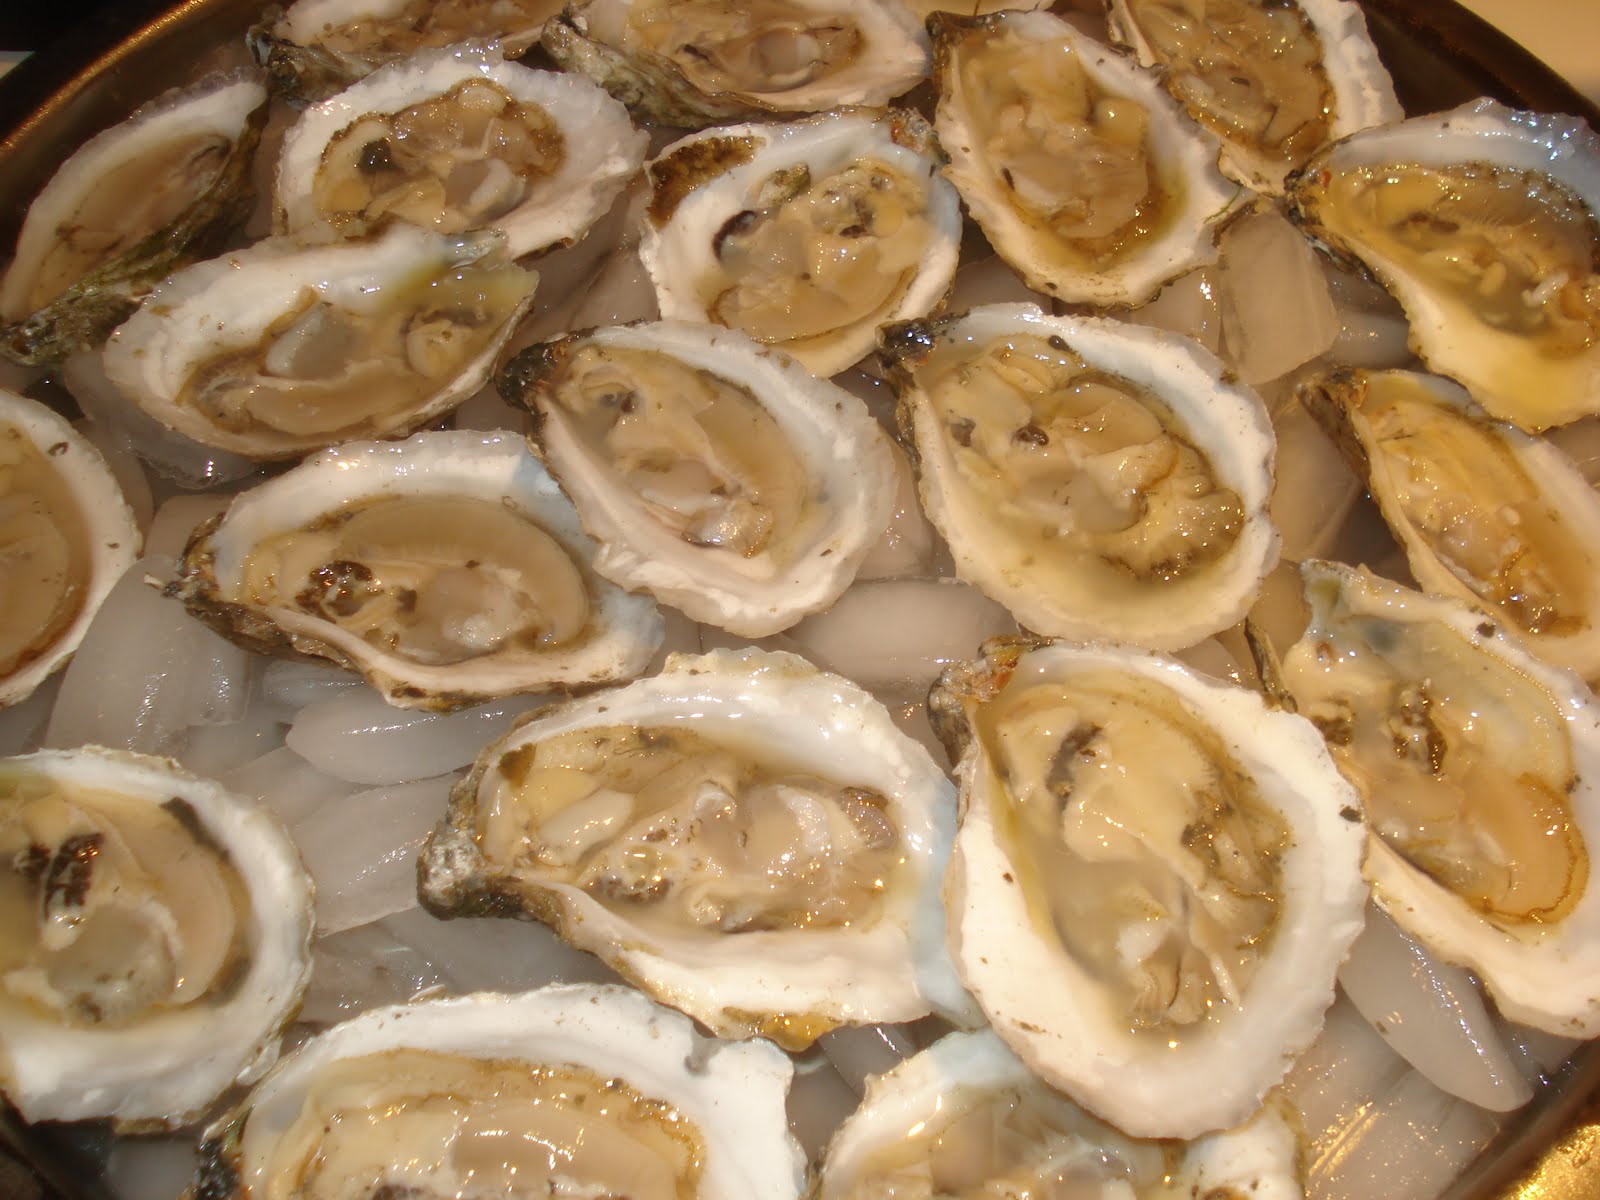 Go Shuck An Oyster: H.M. Terry Co, Inc. - Sewansecott Oysters